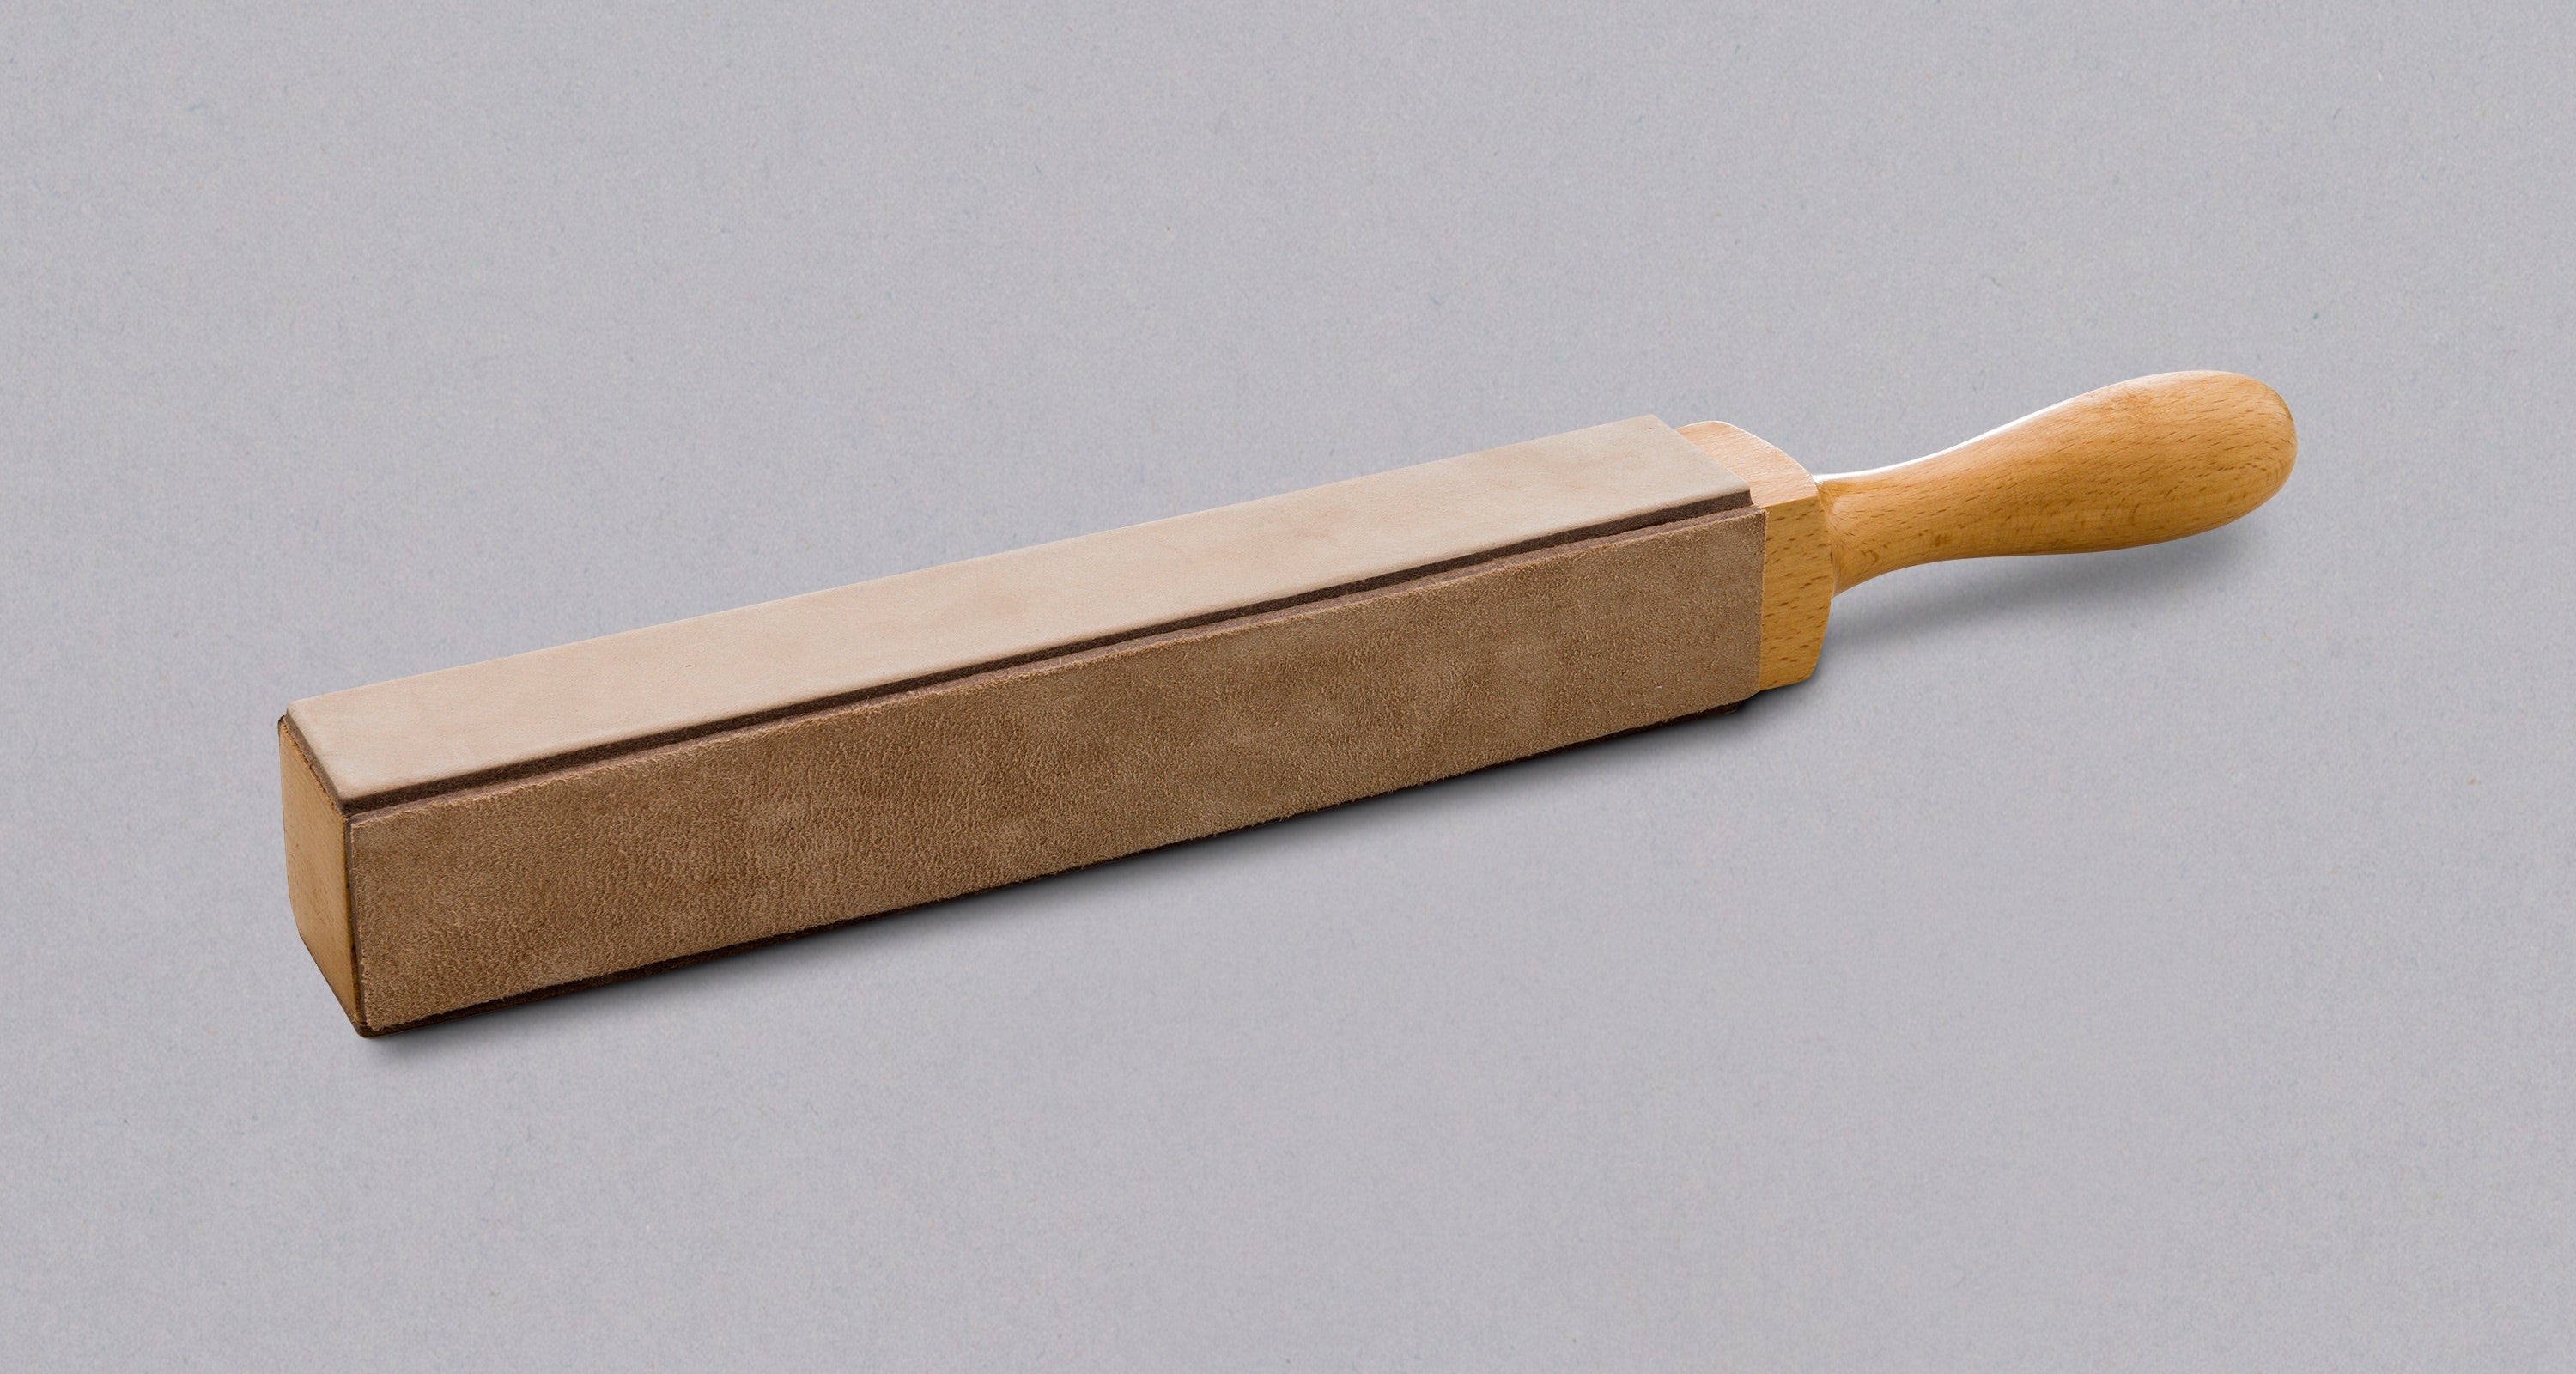 Sharpal - Double-Sided Leather Strop